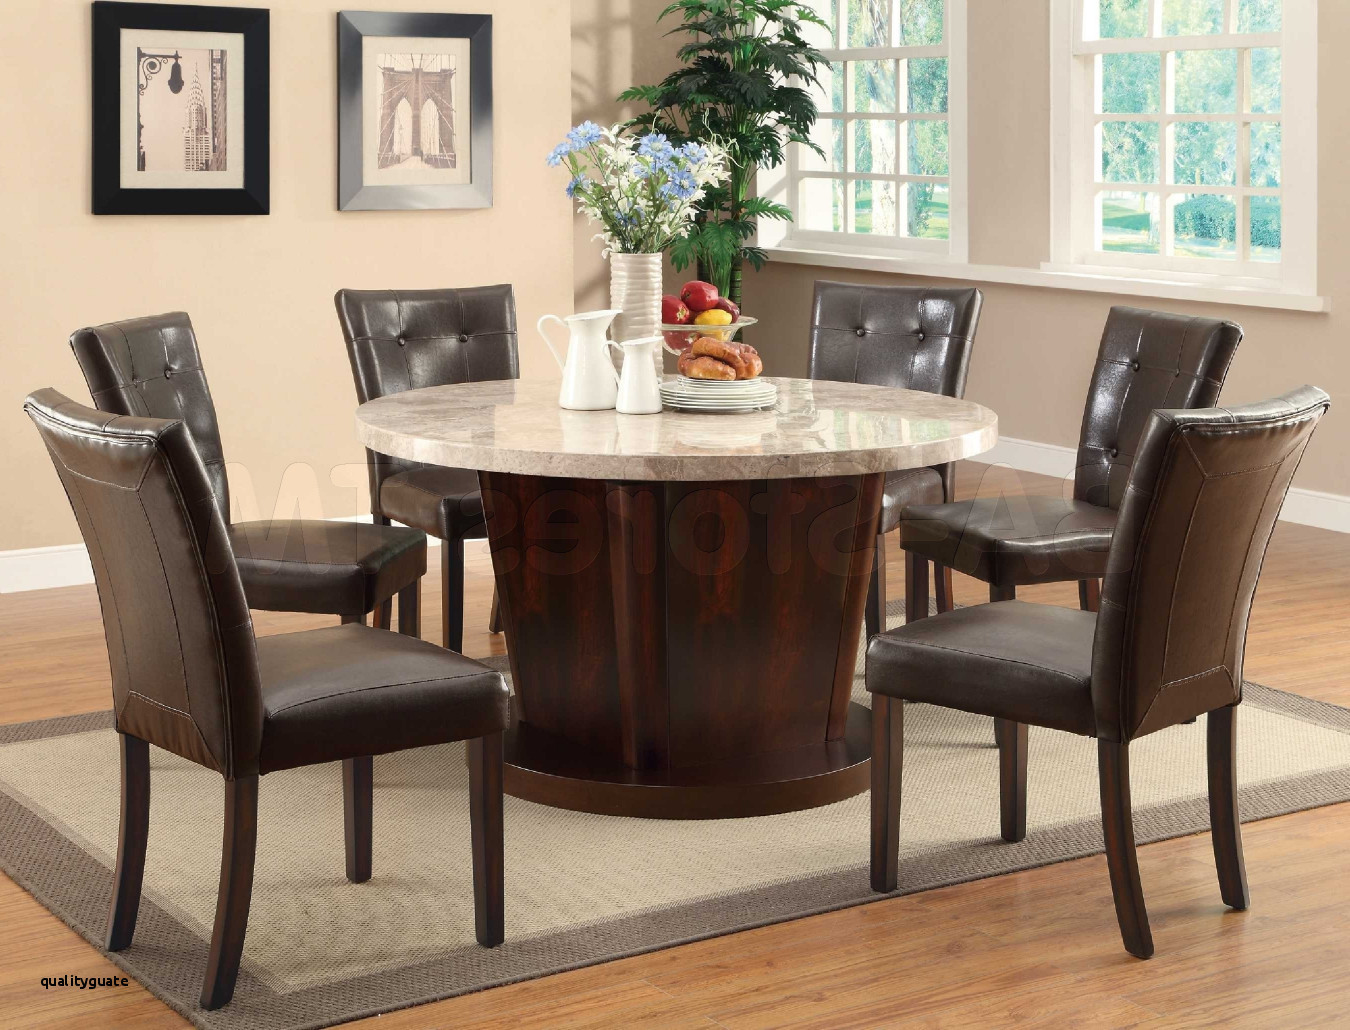 21 Trendy Hardwood Floor Varieties 2024 free download hardwood floor varieties of 26 latest cheap round table and chairs concept with full size of chair black wood dining chairs round dark brown wooden dining table with